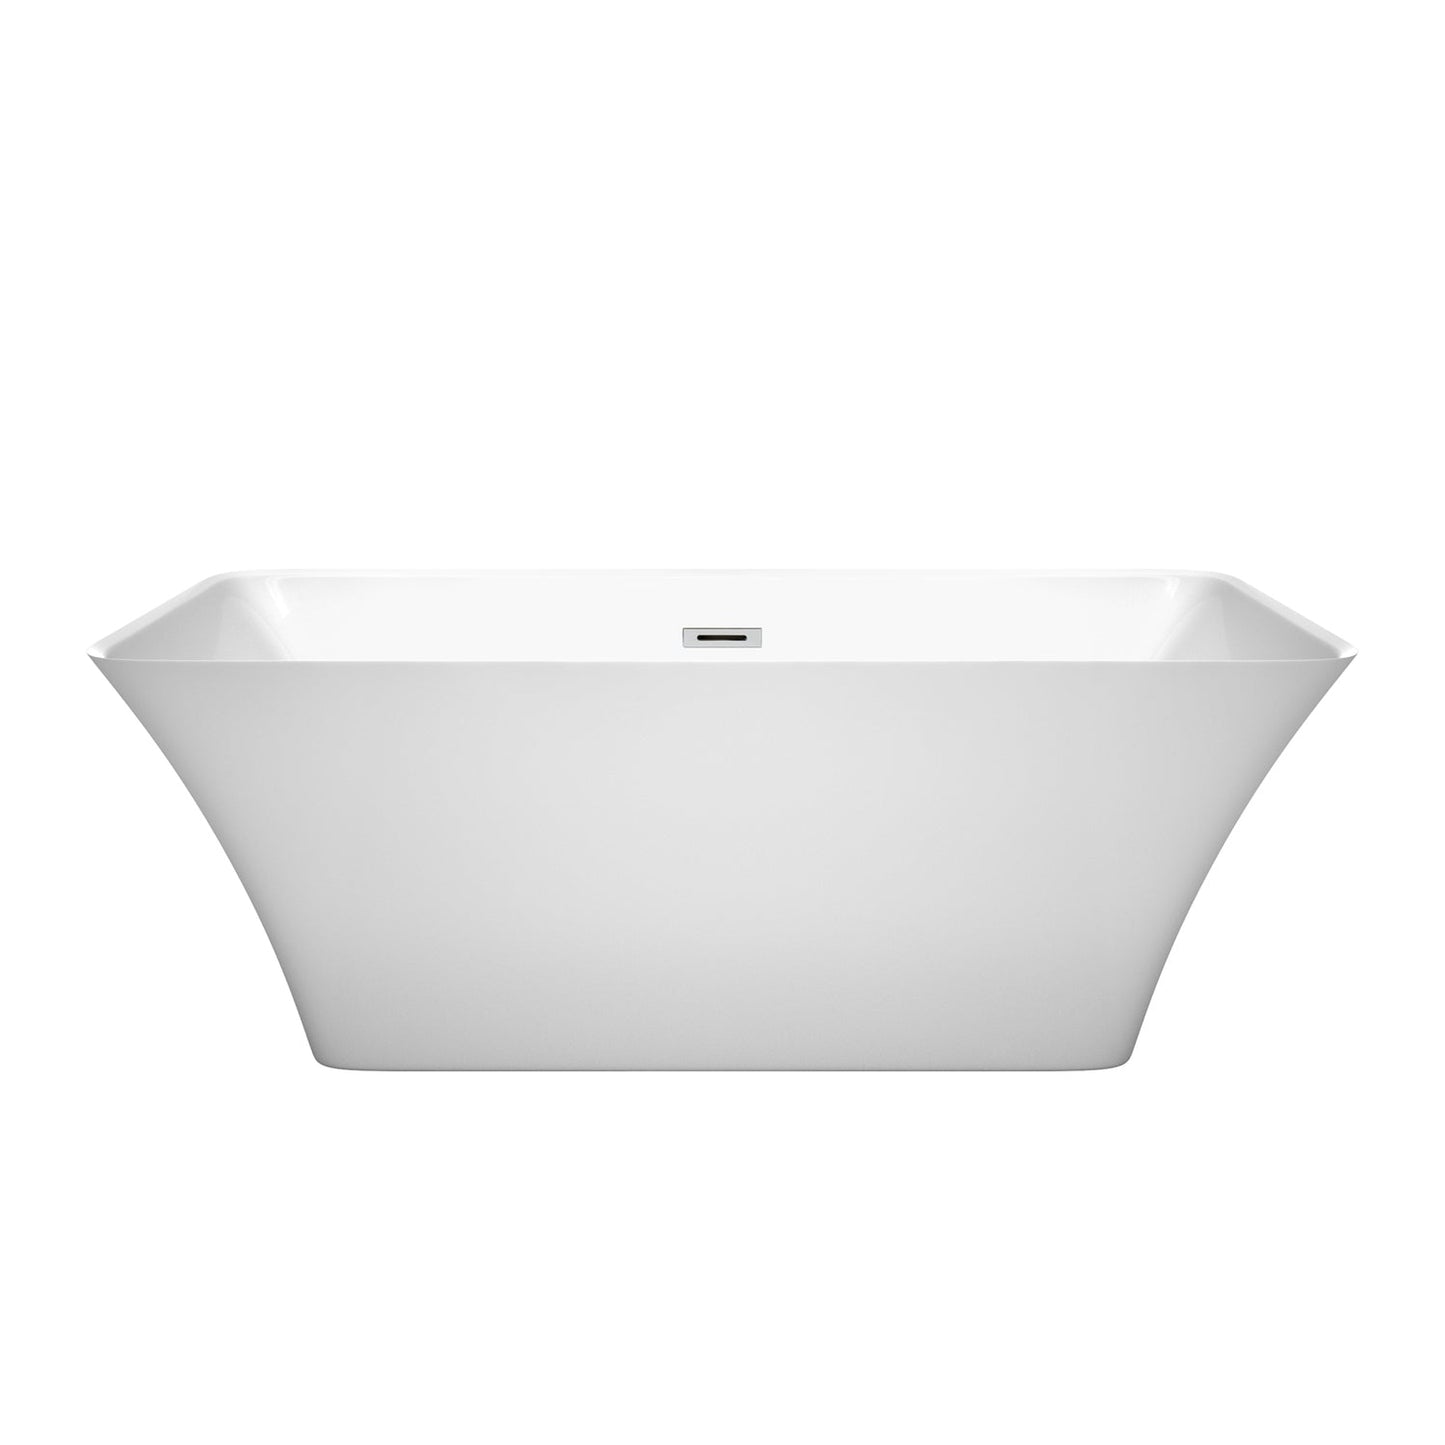 Wyndham Collection Tiffany 59" Freestanding Bathtub in White With Polished Chrome Drain and Overflow Trim